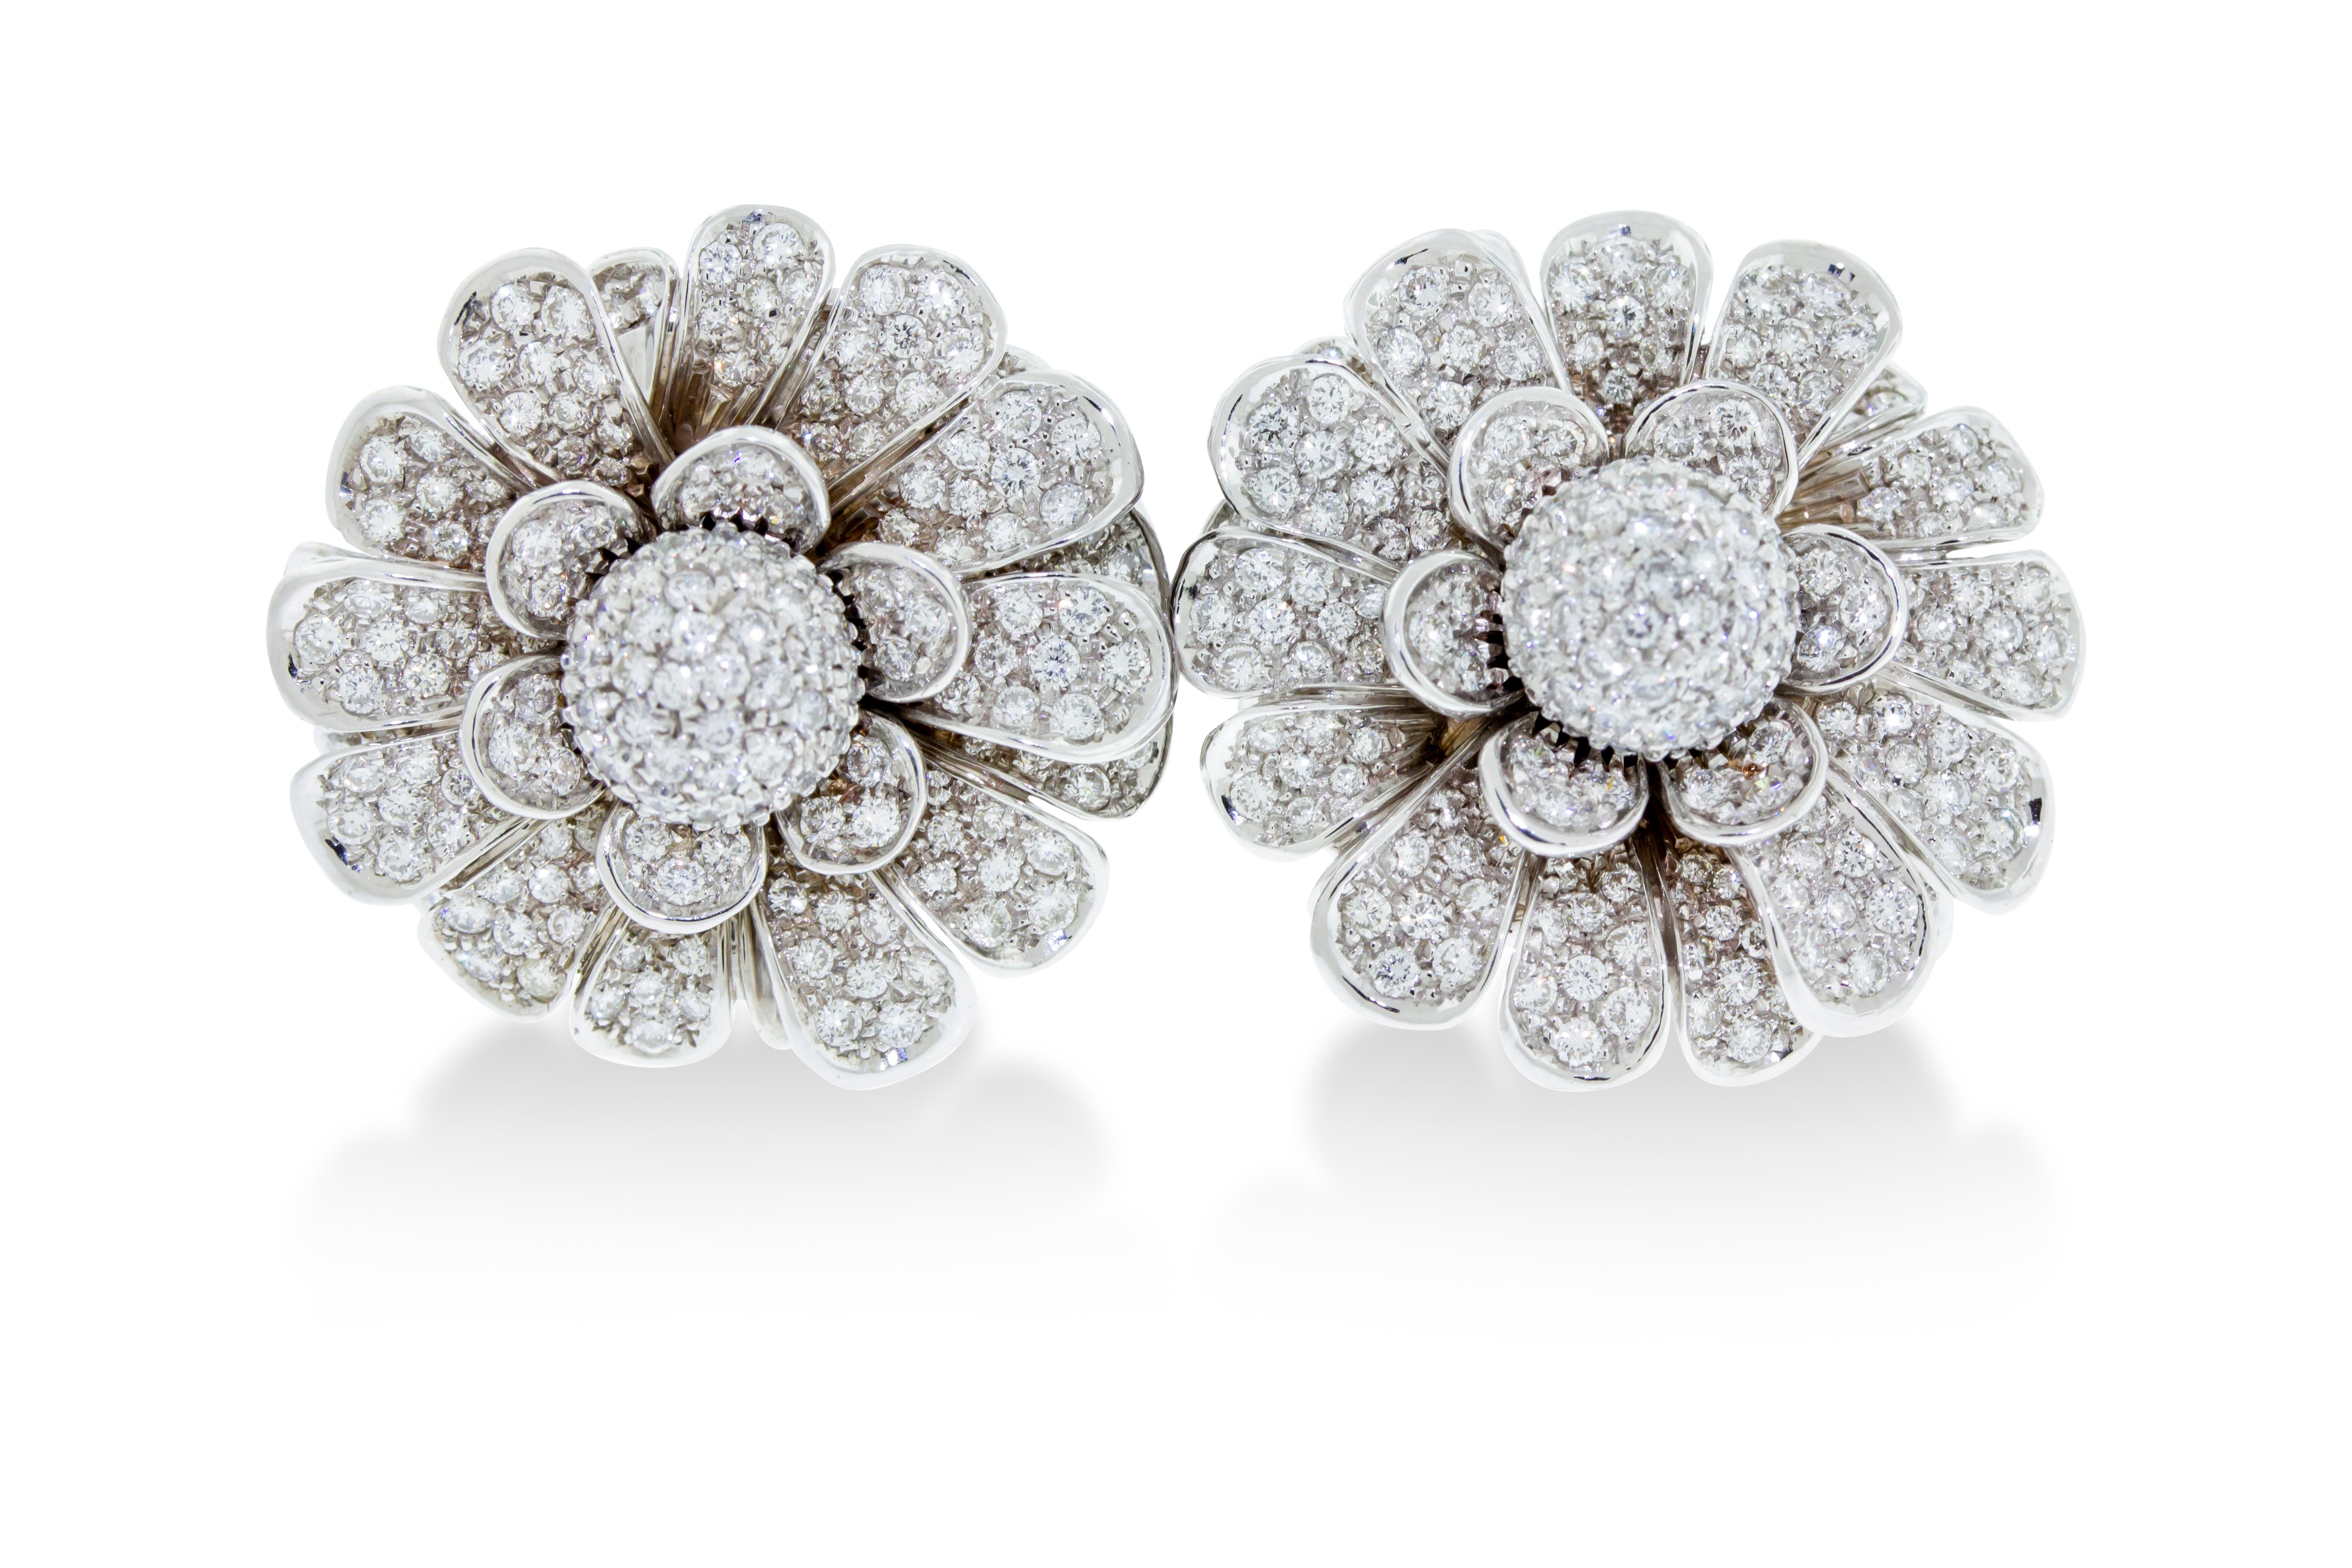 A pair of pave diamond ear clips featuring petals that move mimicking a life like flower. Made in Italy. Set in 44 grams of 18K white gold with a total diamond weight 6 carats. 1.25 inch diameter.

Viewings available in our NYC showroom by